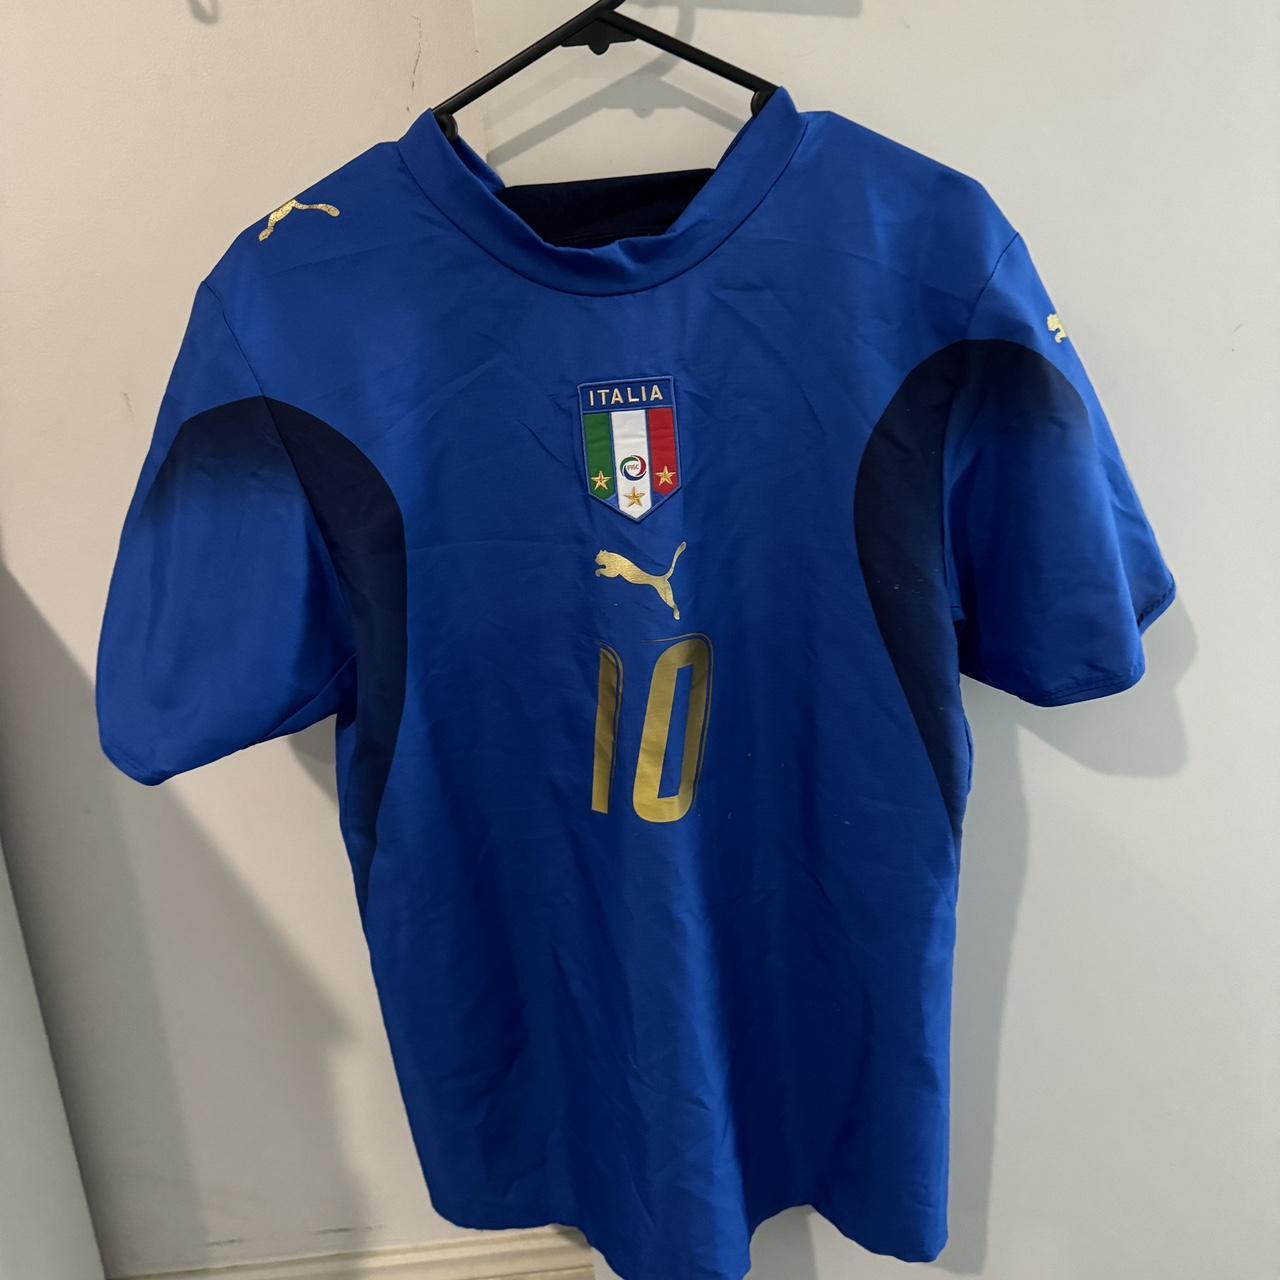 Italy Home Kit - Totti #10 Not an authentic kit - Depop